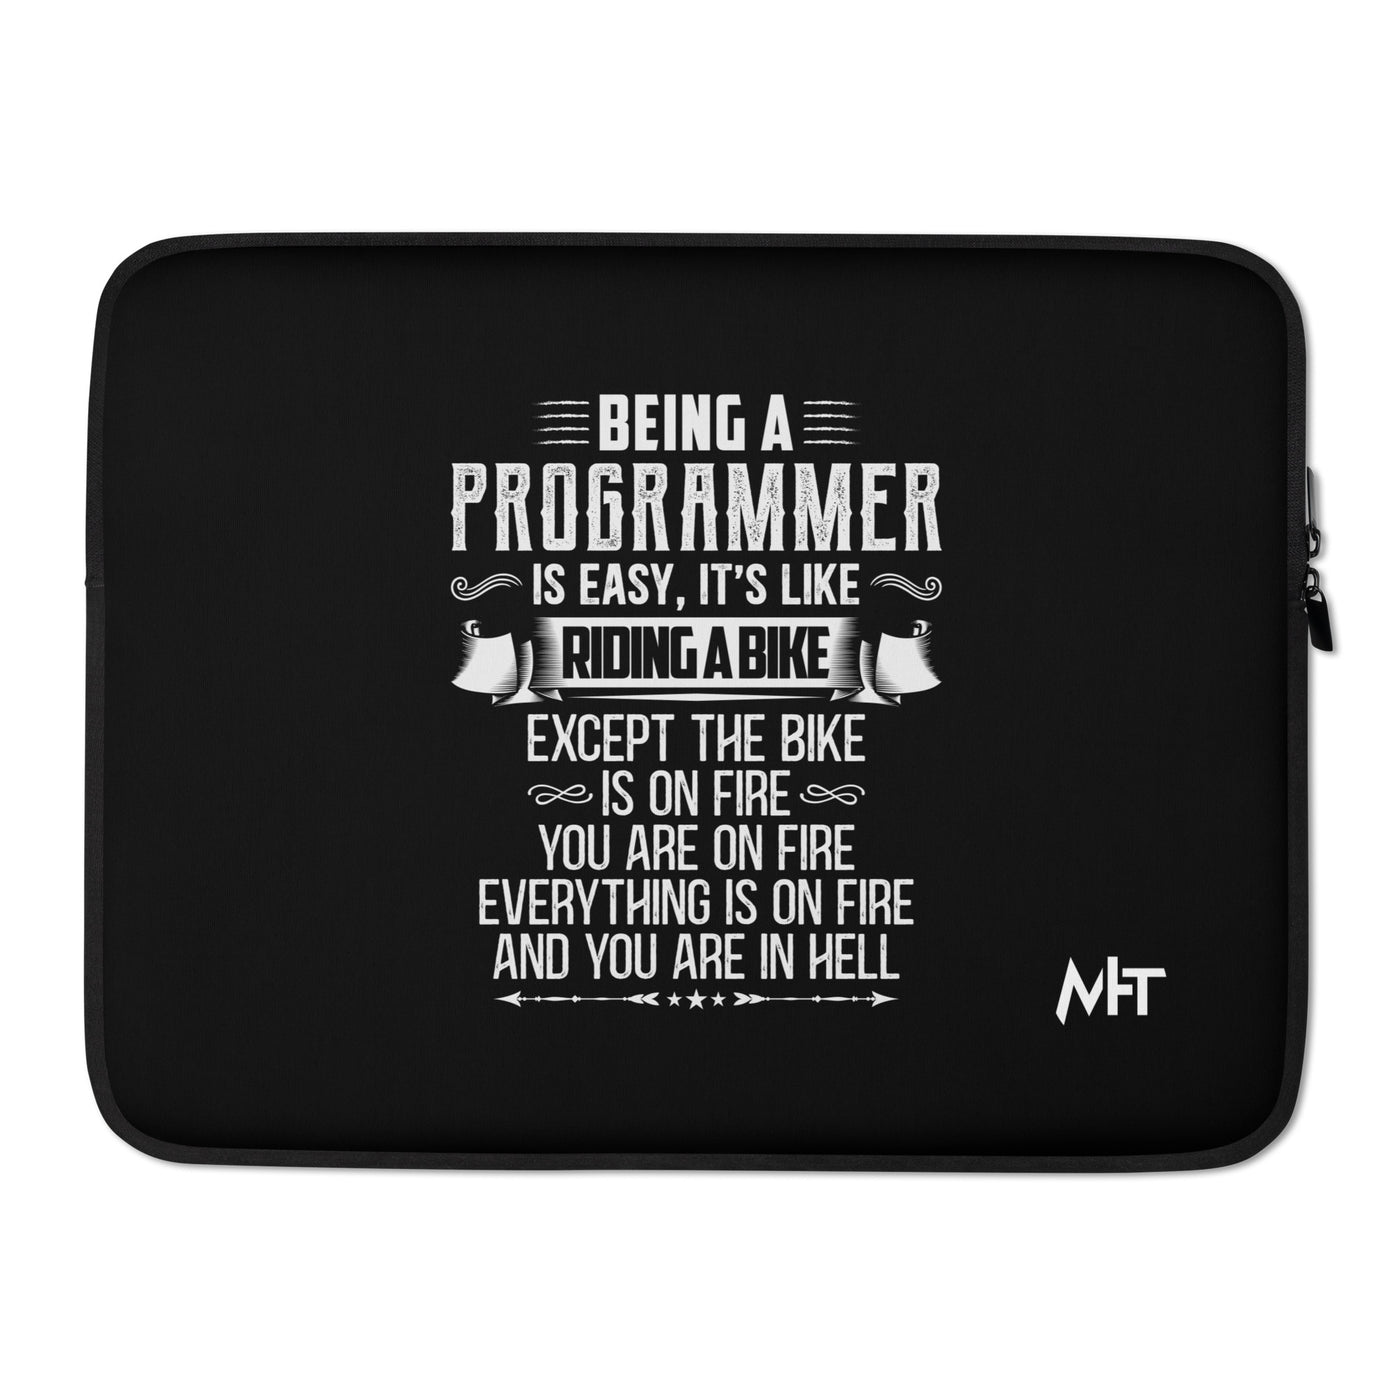 Being a Programmer is easy - Laptop Sleeve